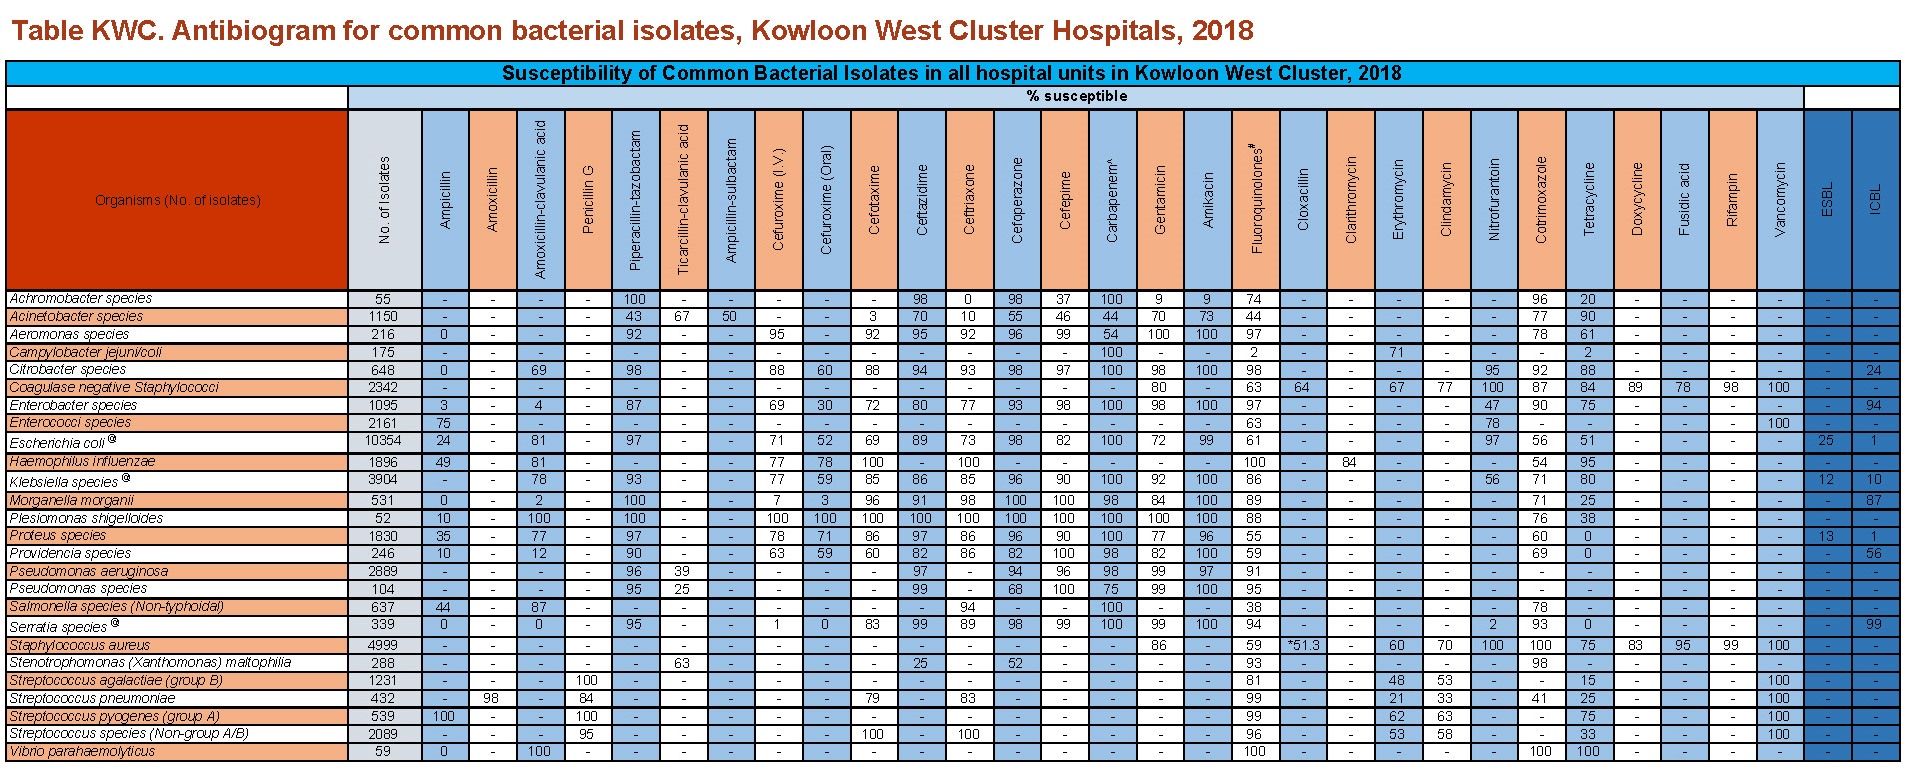 Table KWC. Antibiogram for common bacterial isolates, Kowloon West Cluster Hospitals, 2018